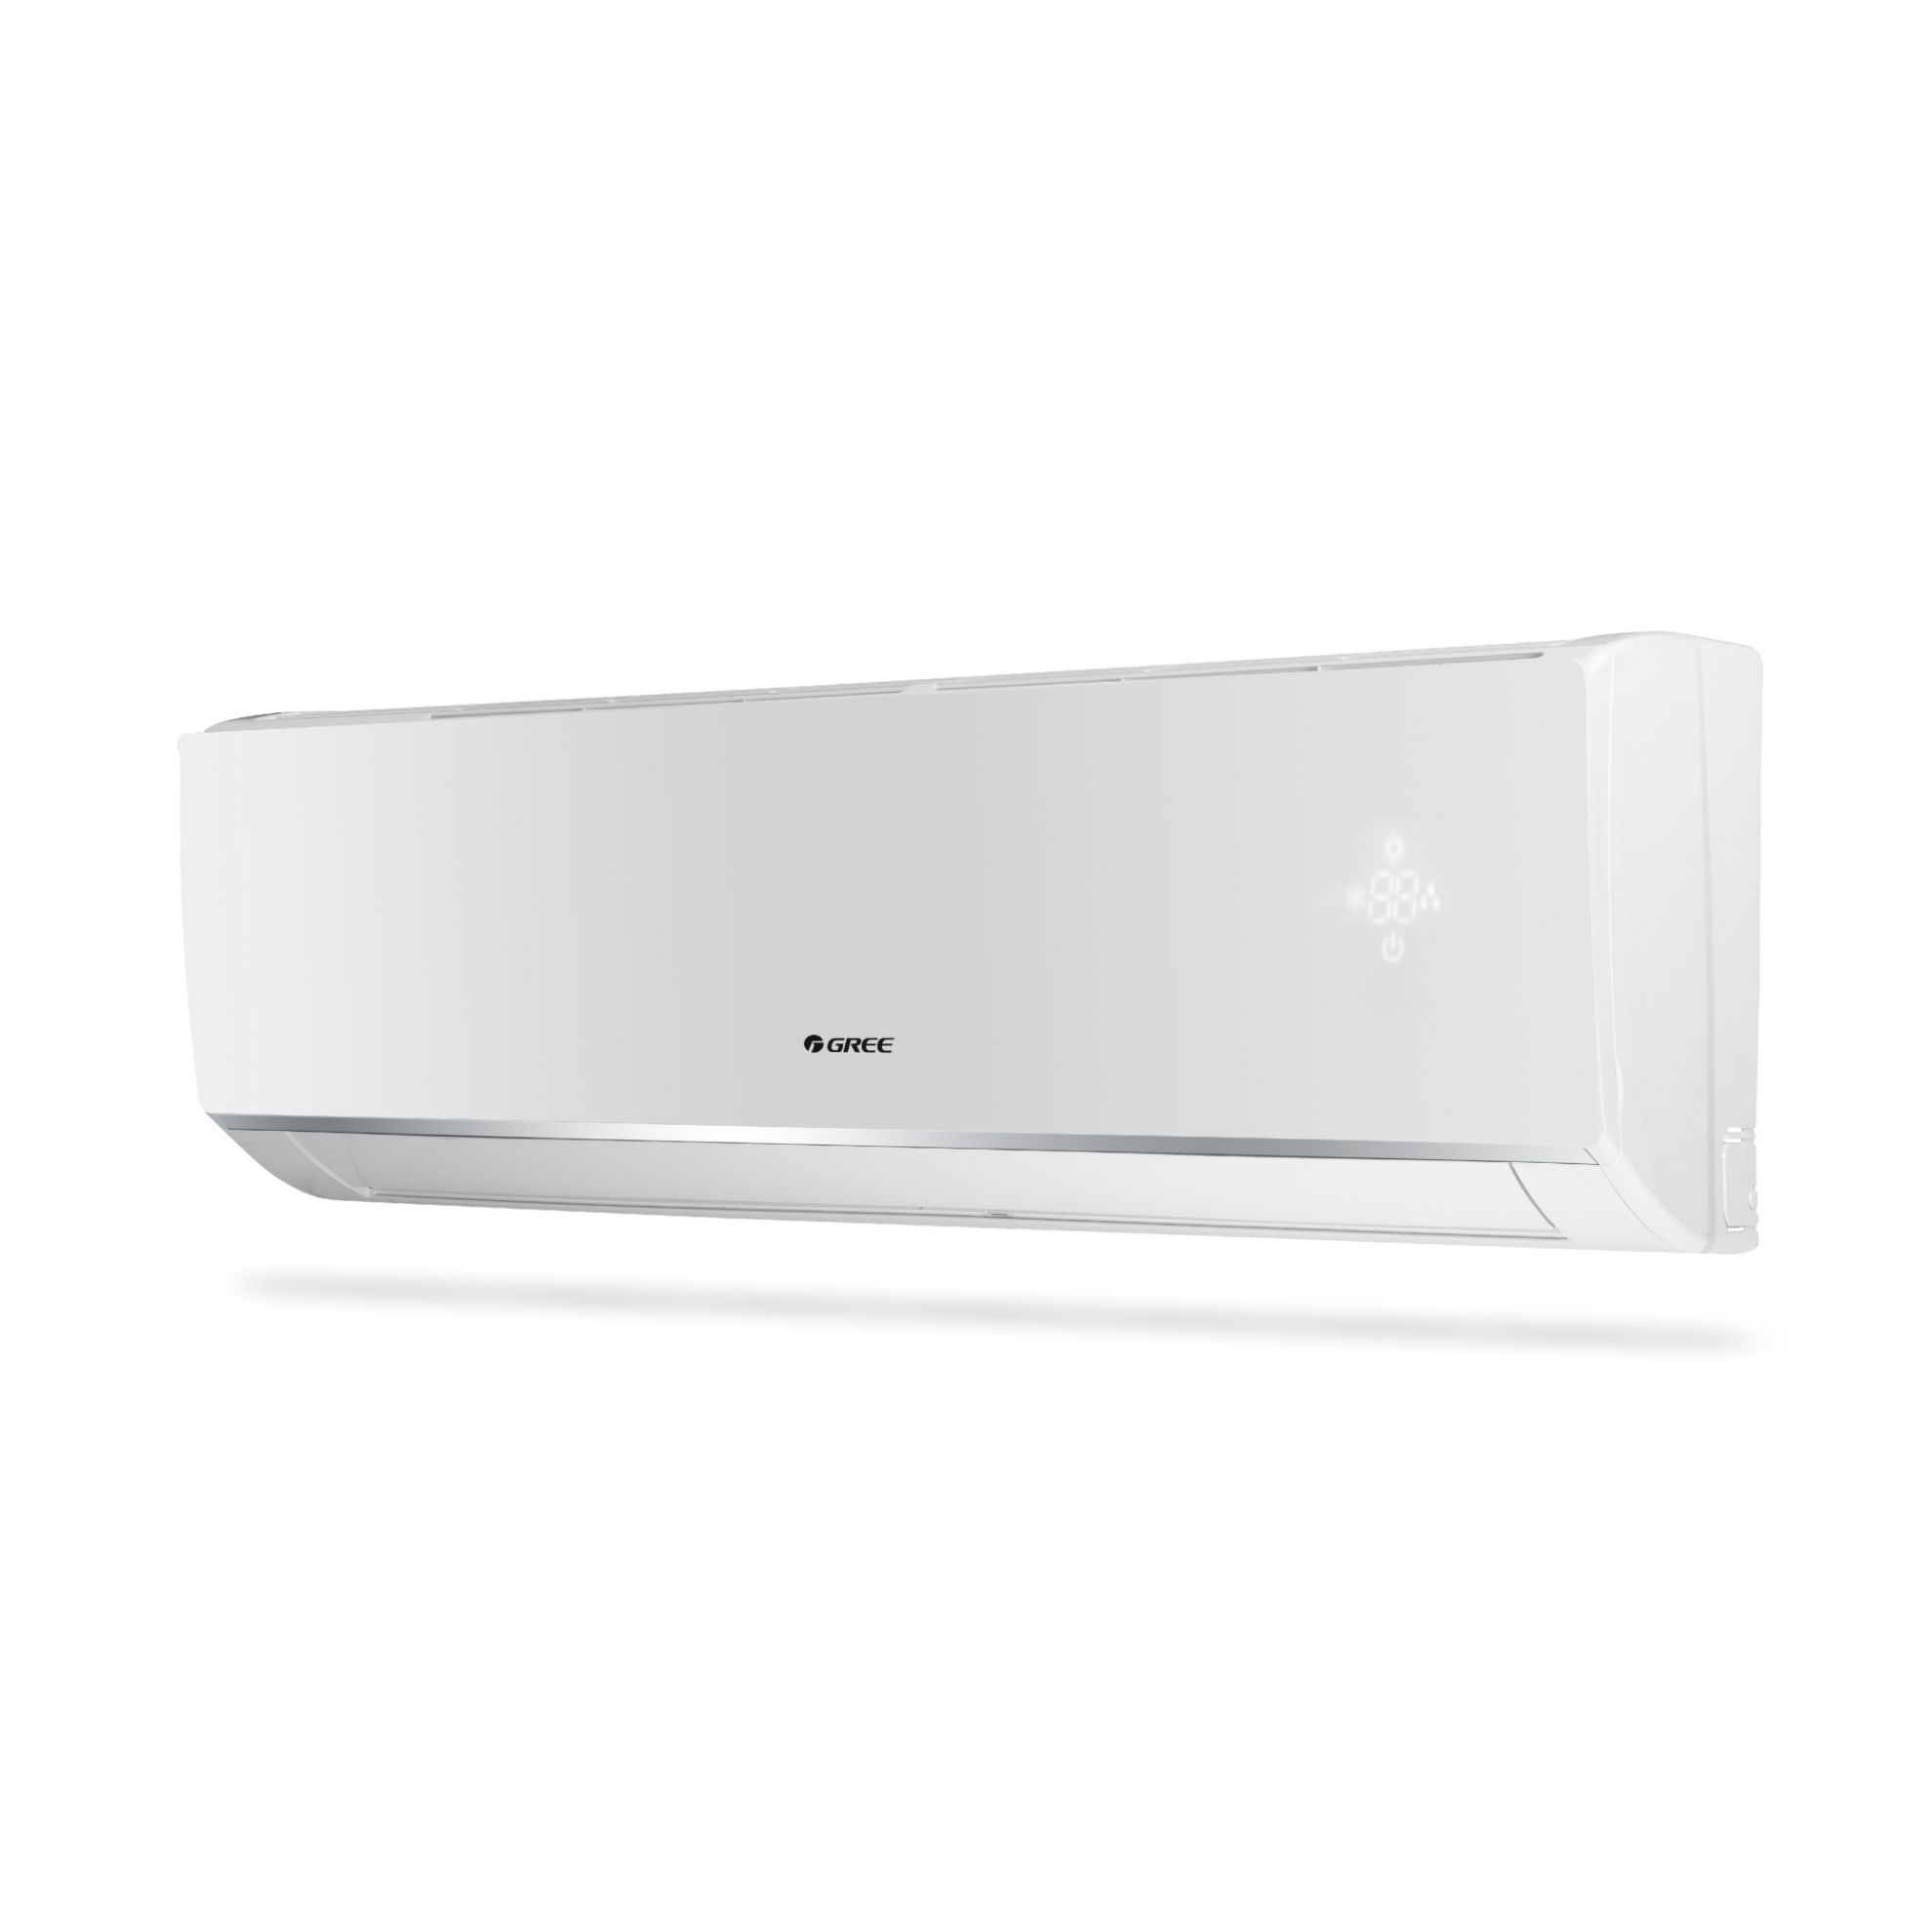 Picture of Gree - G4'matic-R20C3 - 1.6 Ton|Reciprocating|Wall Split AC